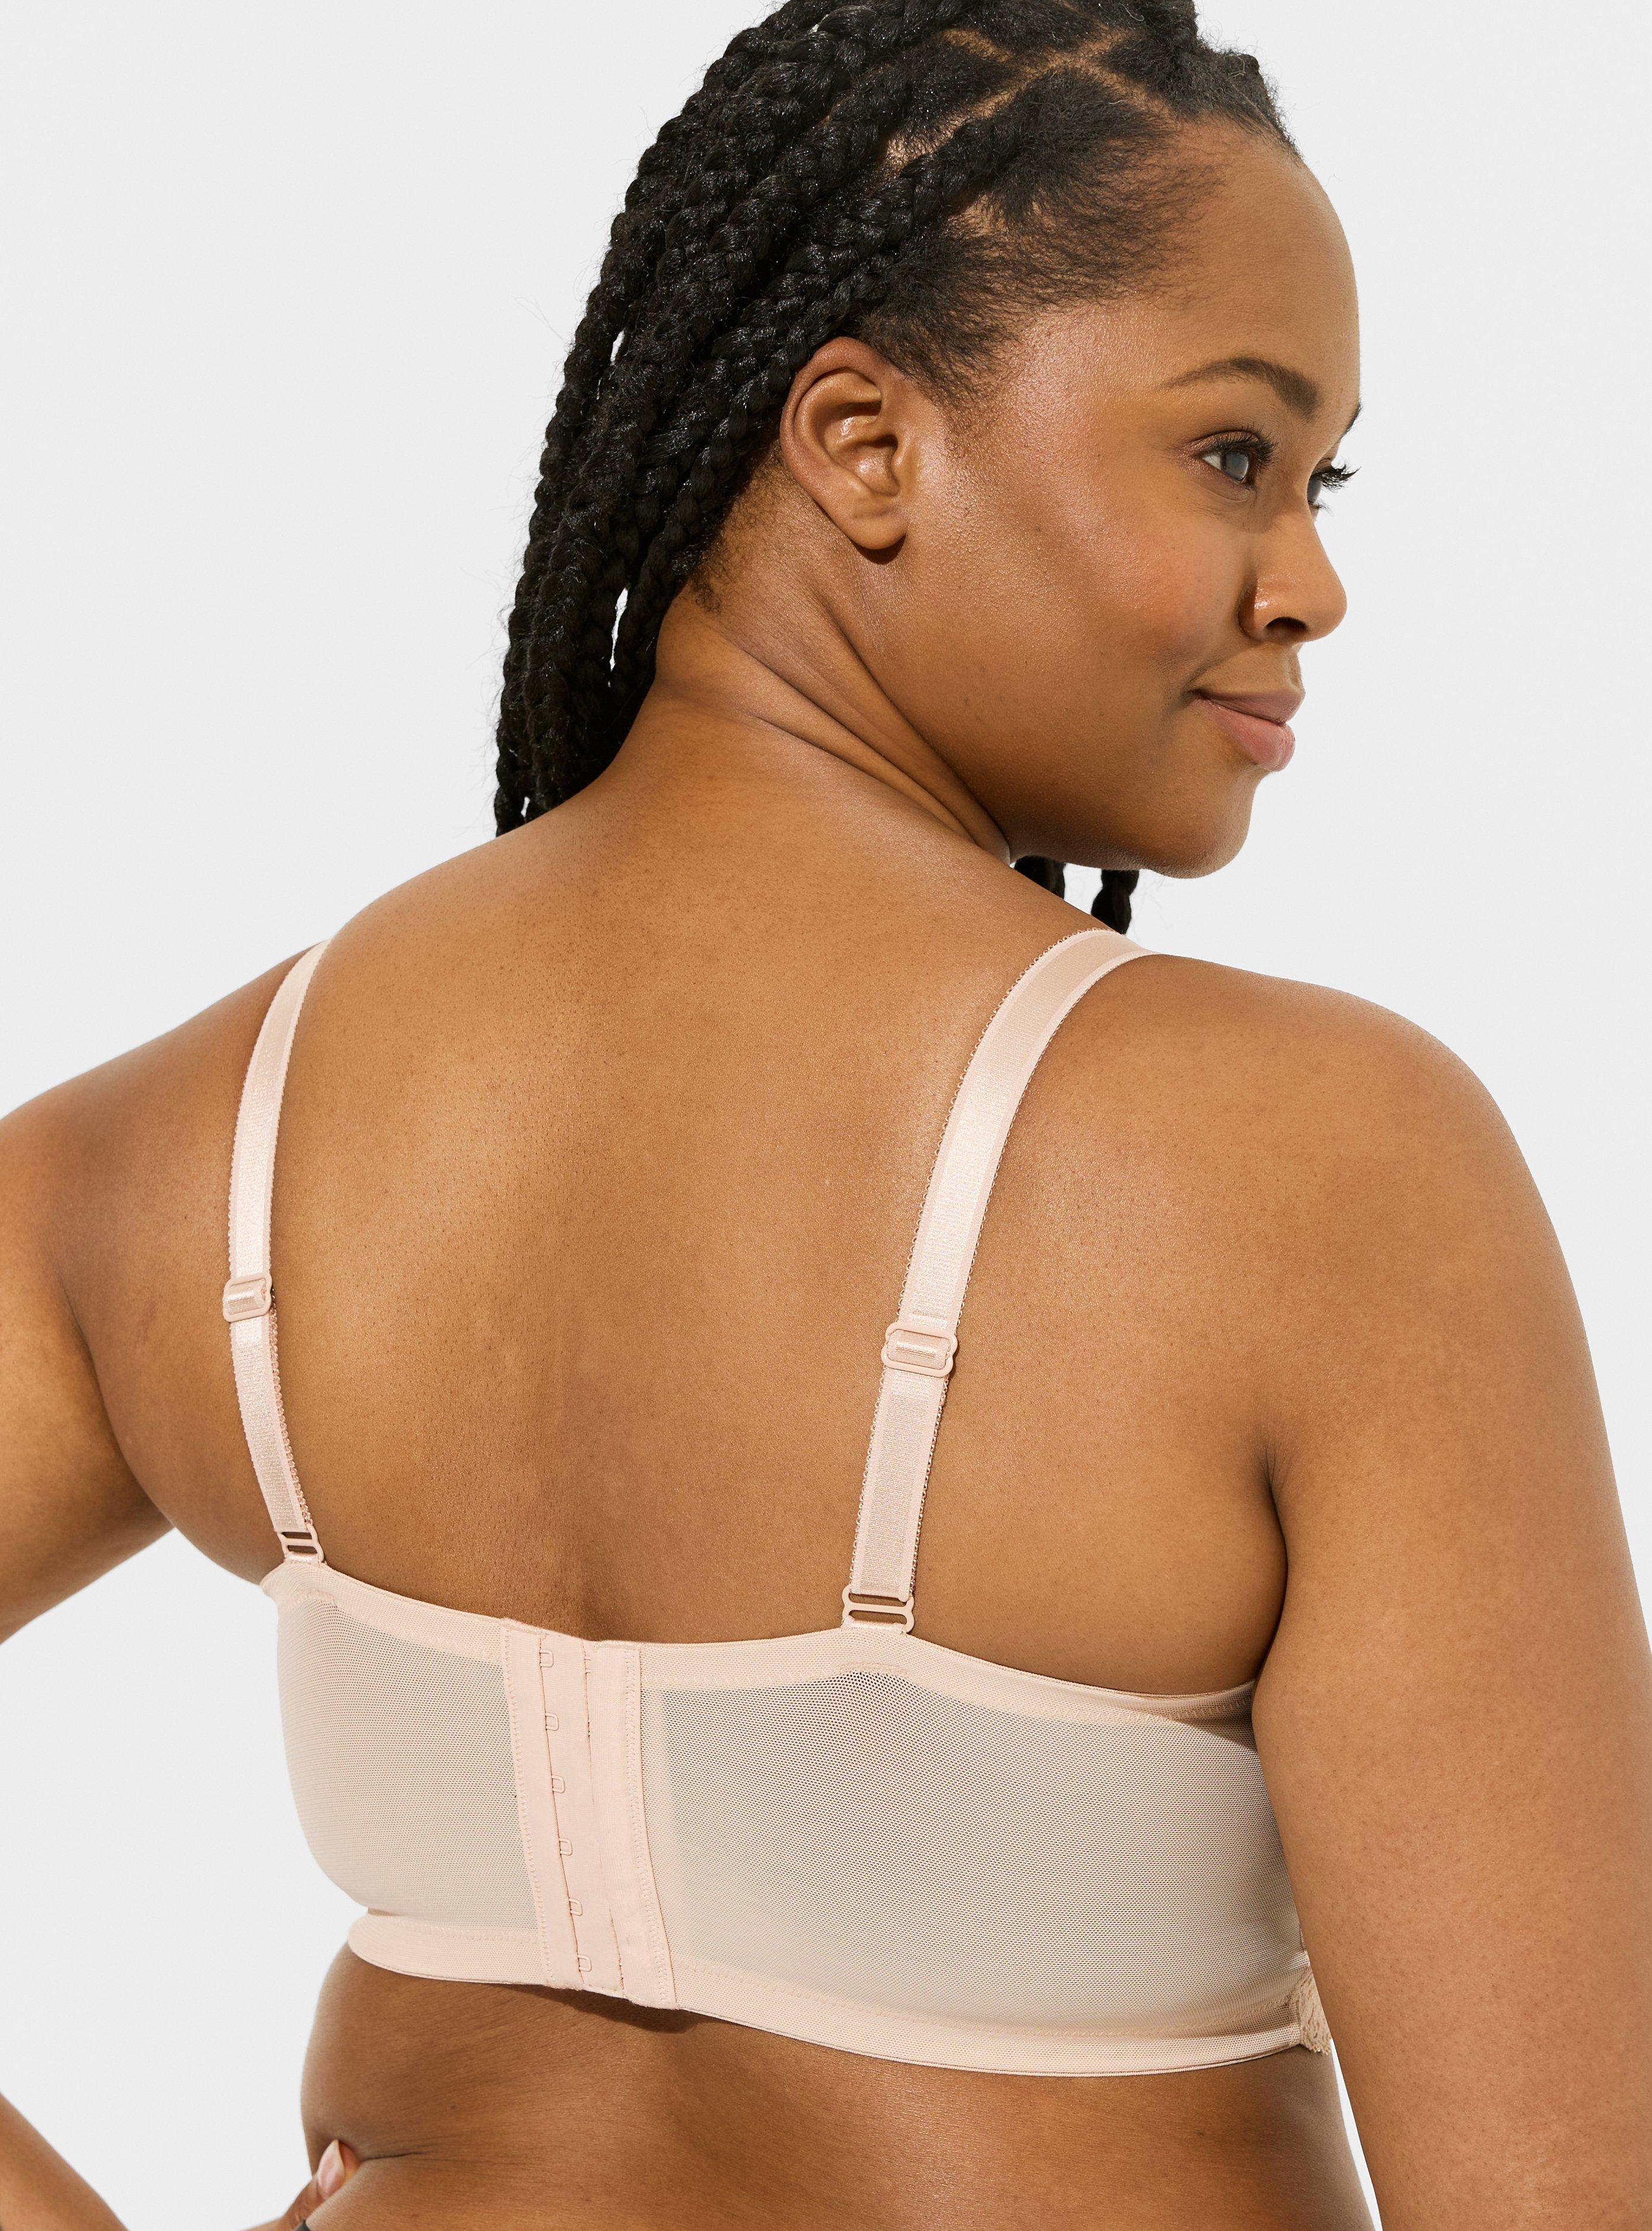 Wide back bra! Helps hide back rolls usually caused by thin straps bra